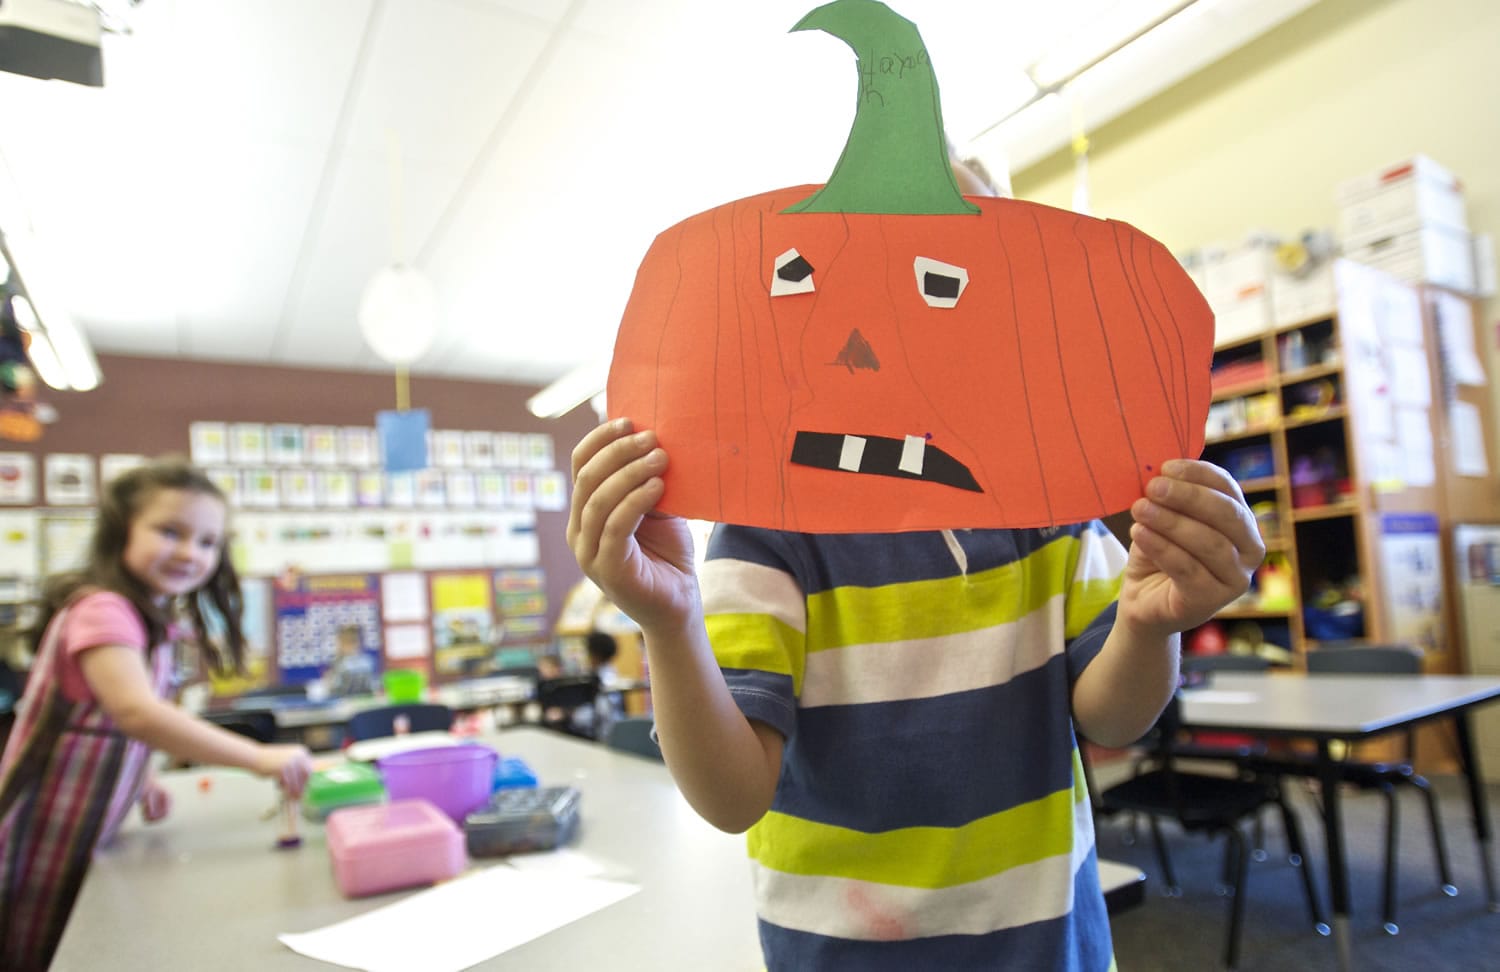 Hayden Crouse, 5, shows off a paper jack-o'-lantern he crafted in Laura Tomberlin's classroom on Oct. 22 at La Center Elementary School.